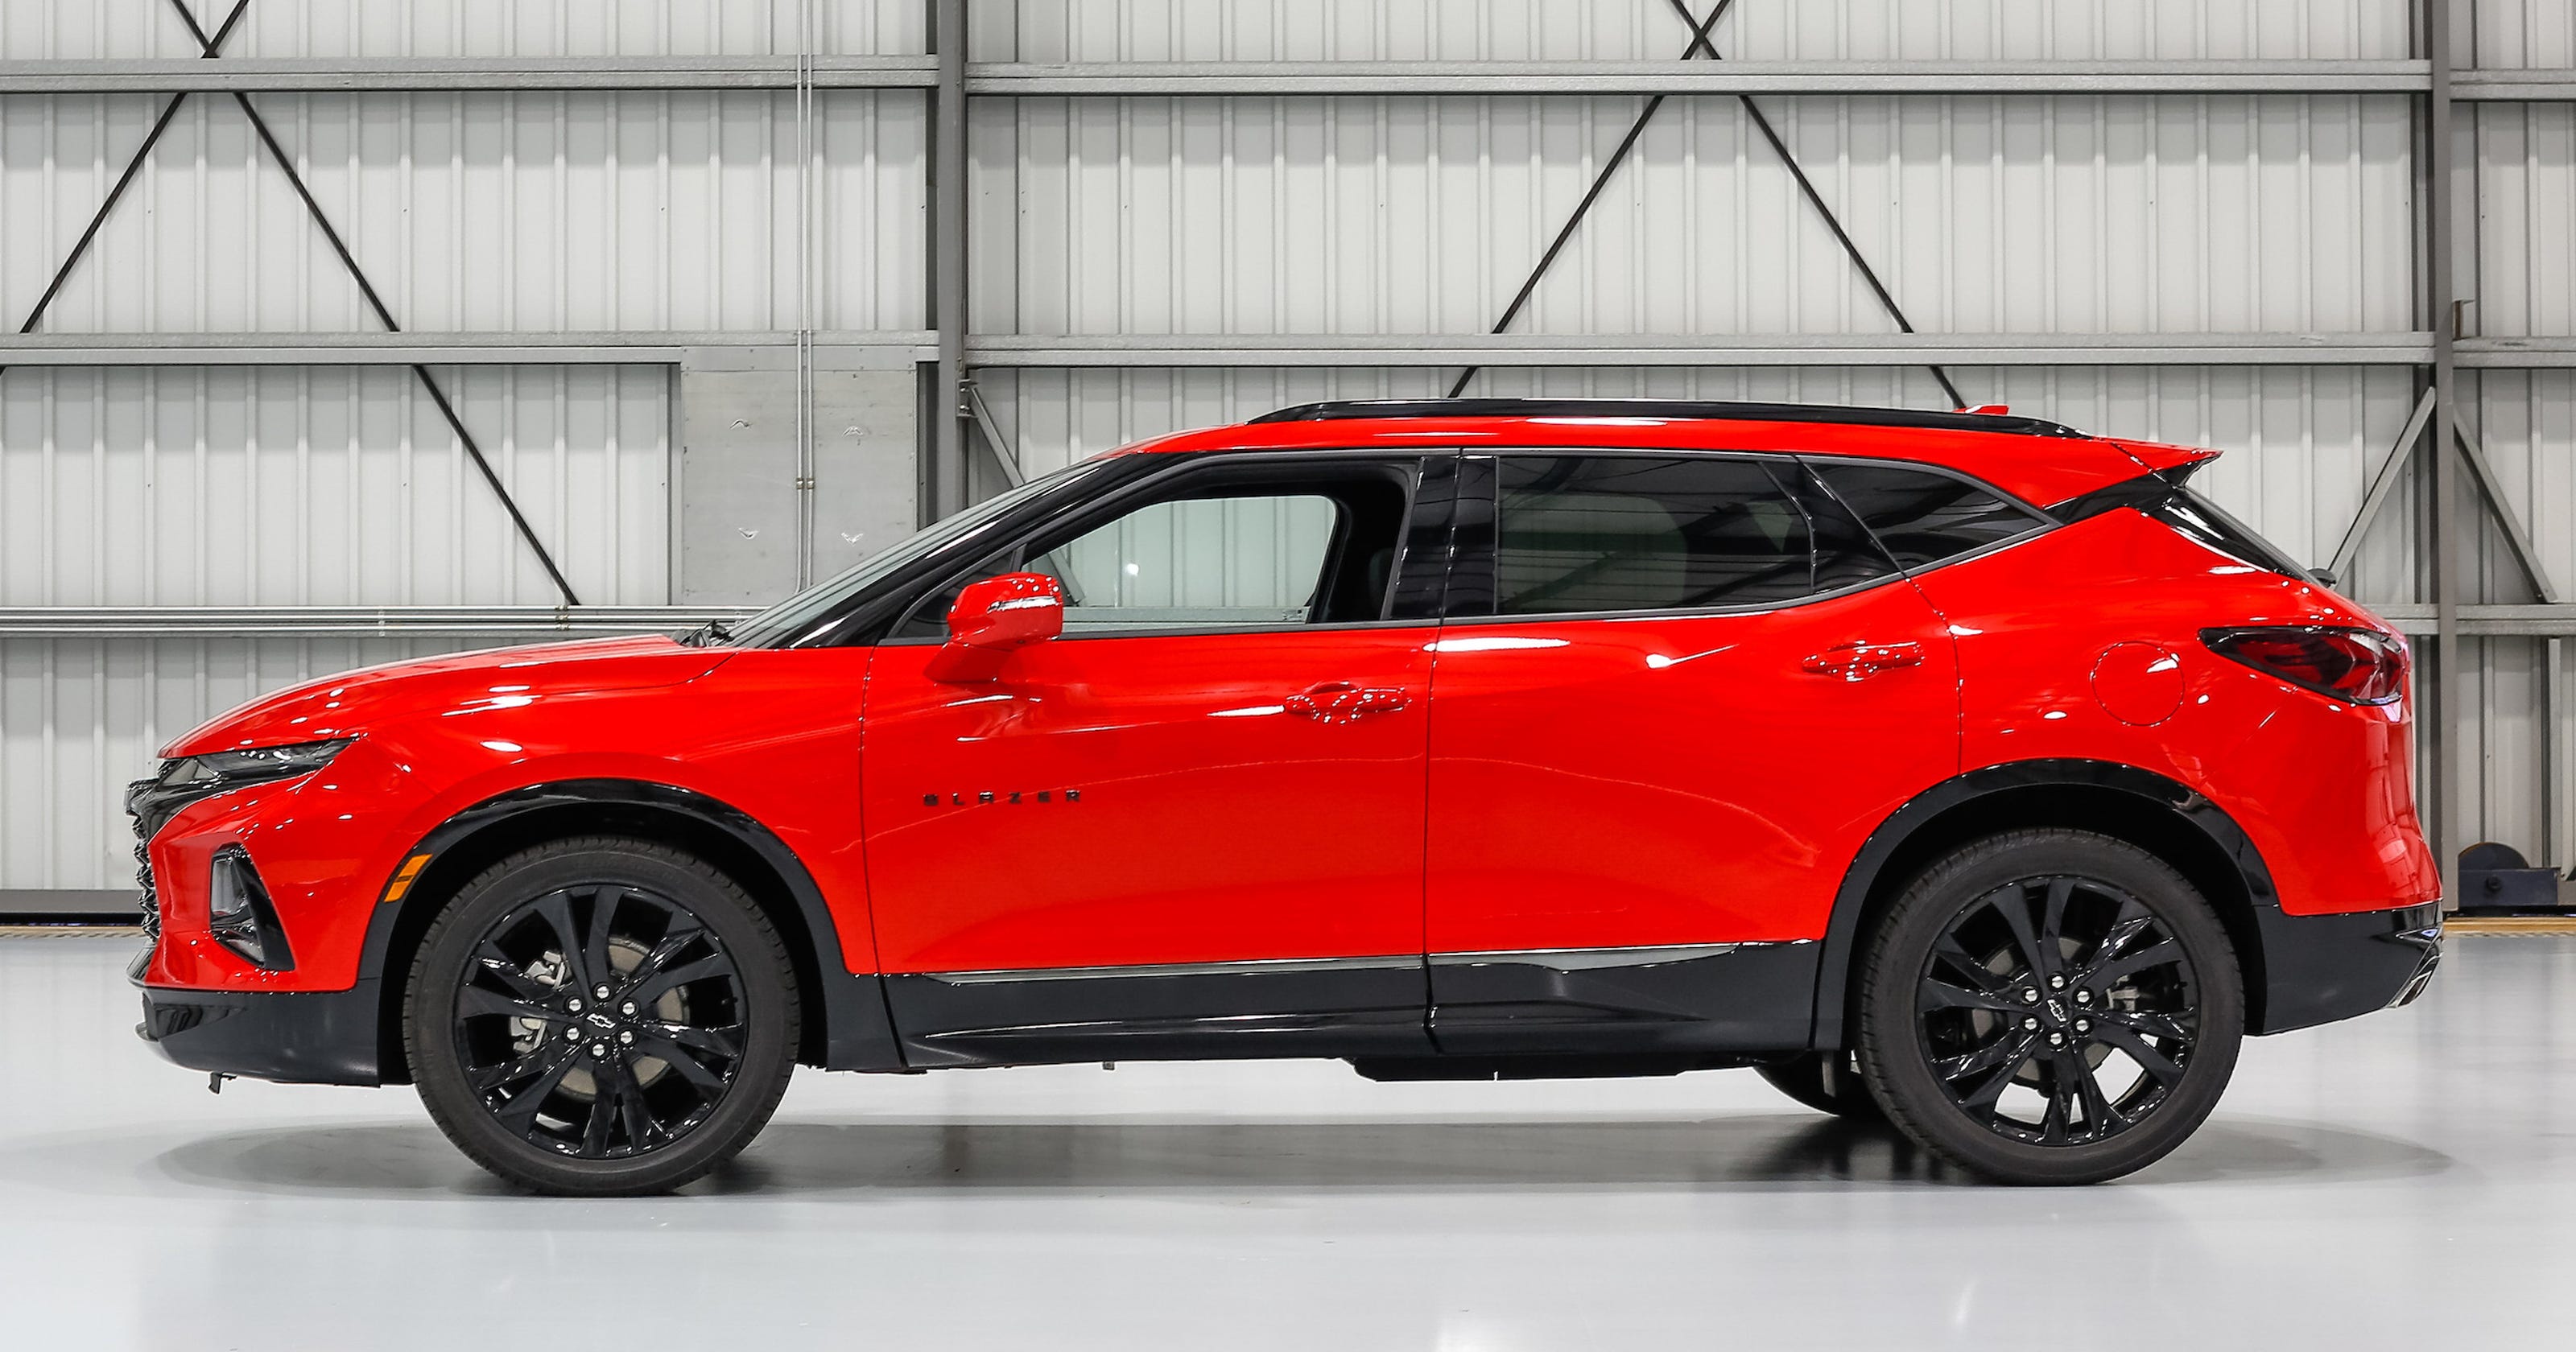 2019-chevy-blazer-wins-with-style-handling-features